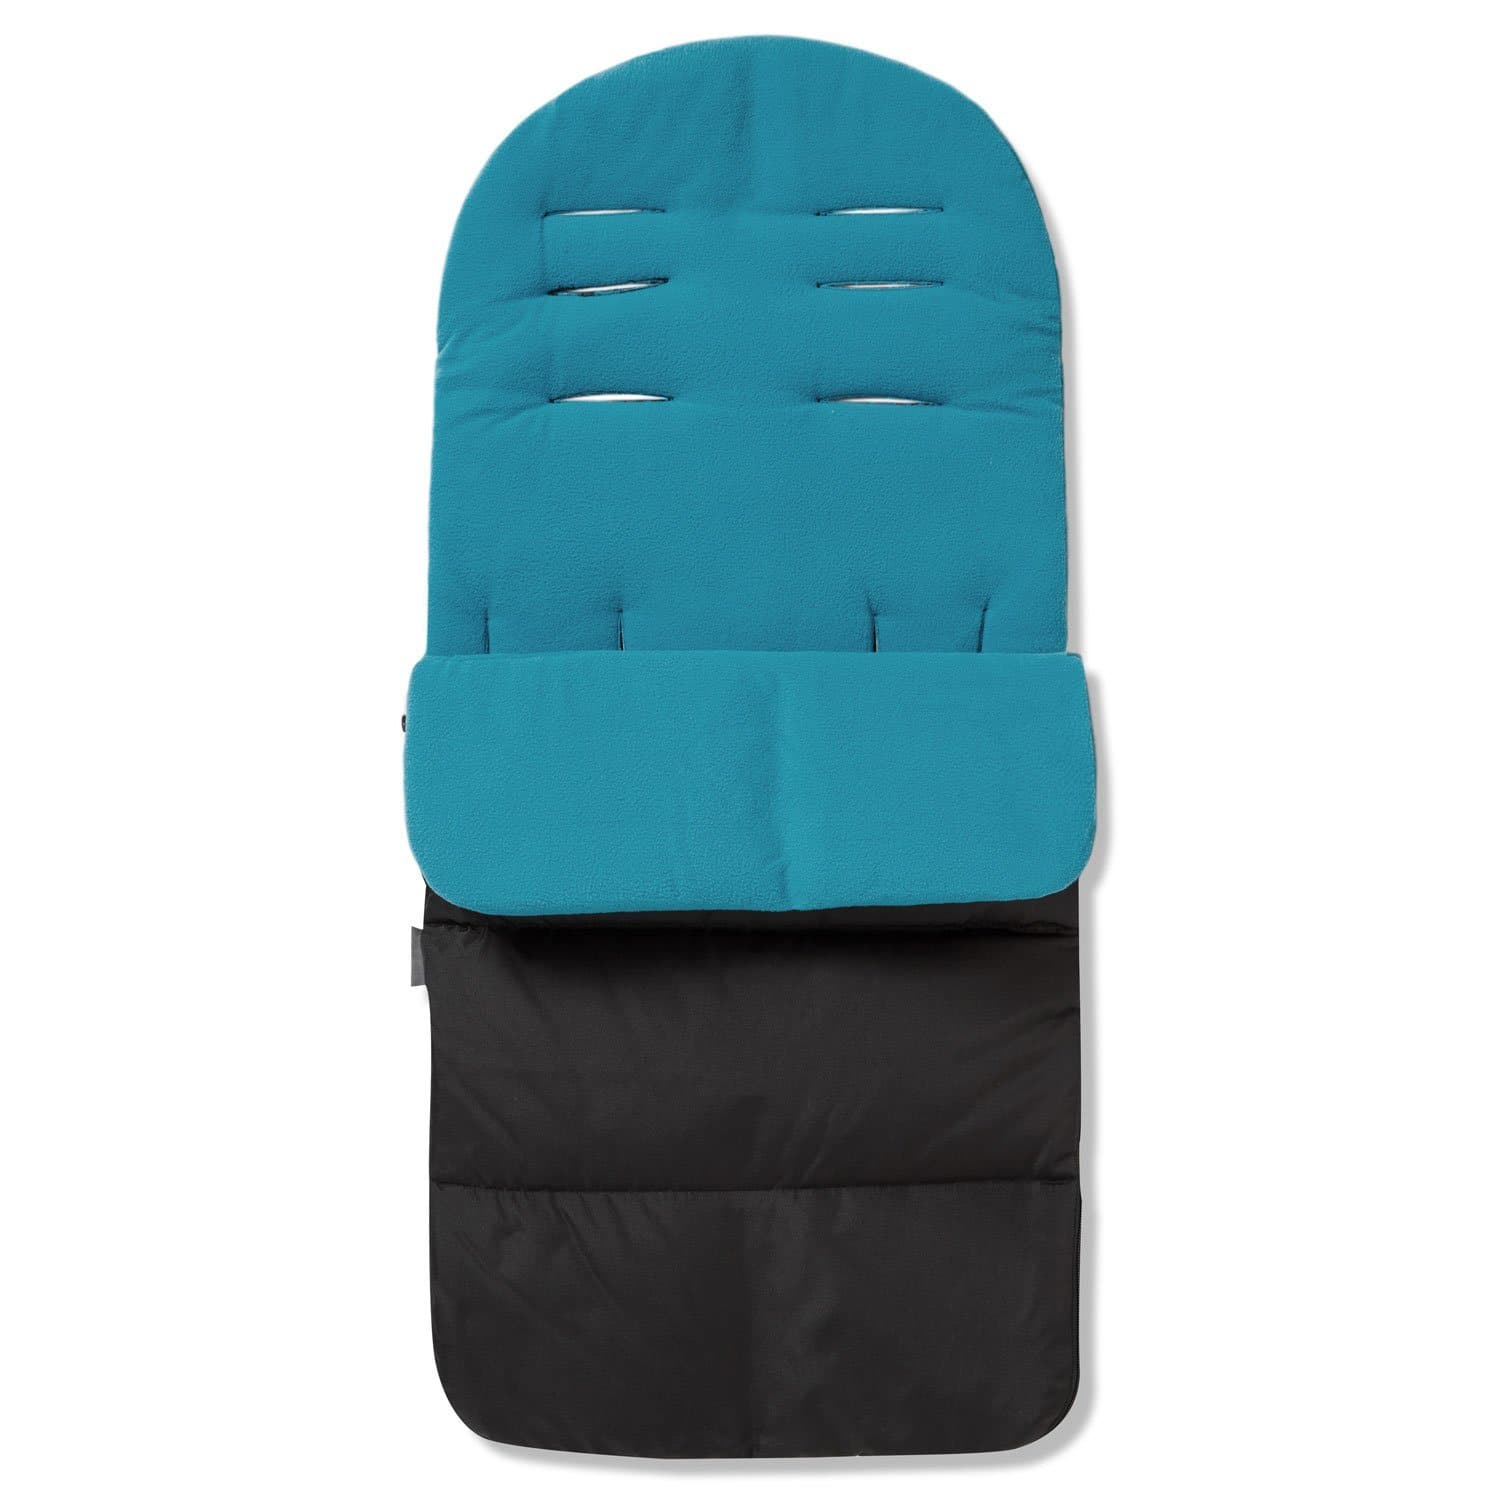 Premium Footmuff / Cosy Toes Compatible with Baby Trend - Ocean Blue / Fits All Models | For Your Little One